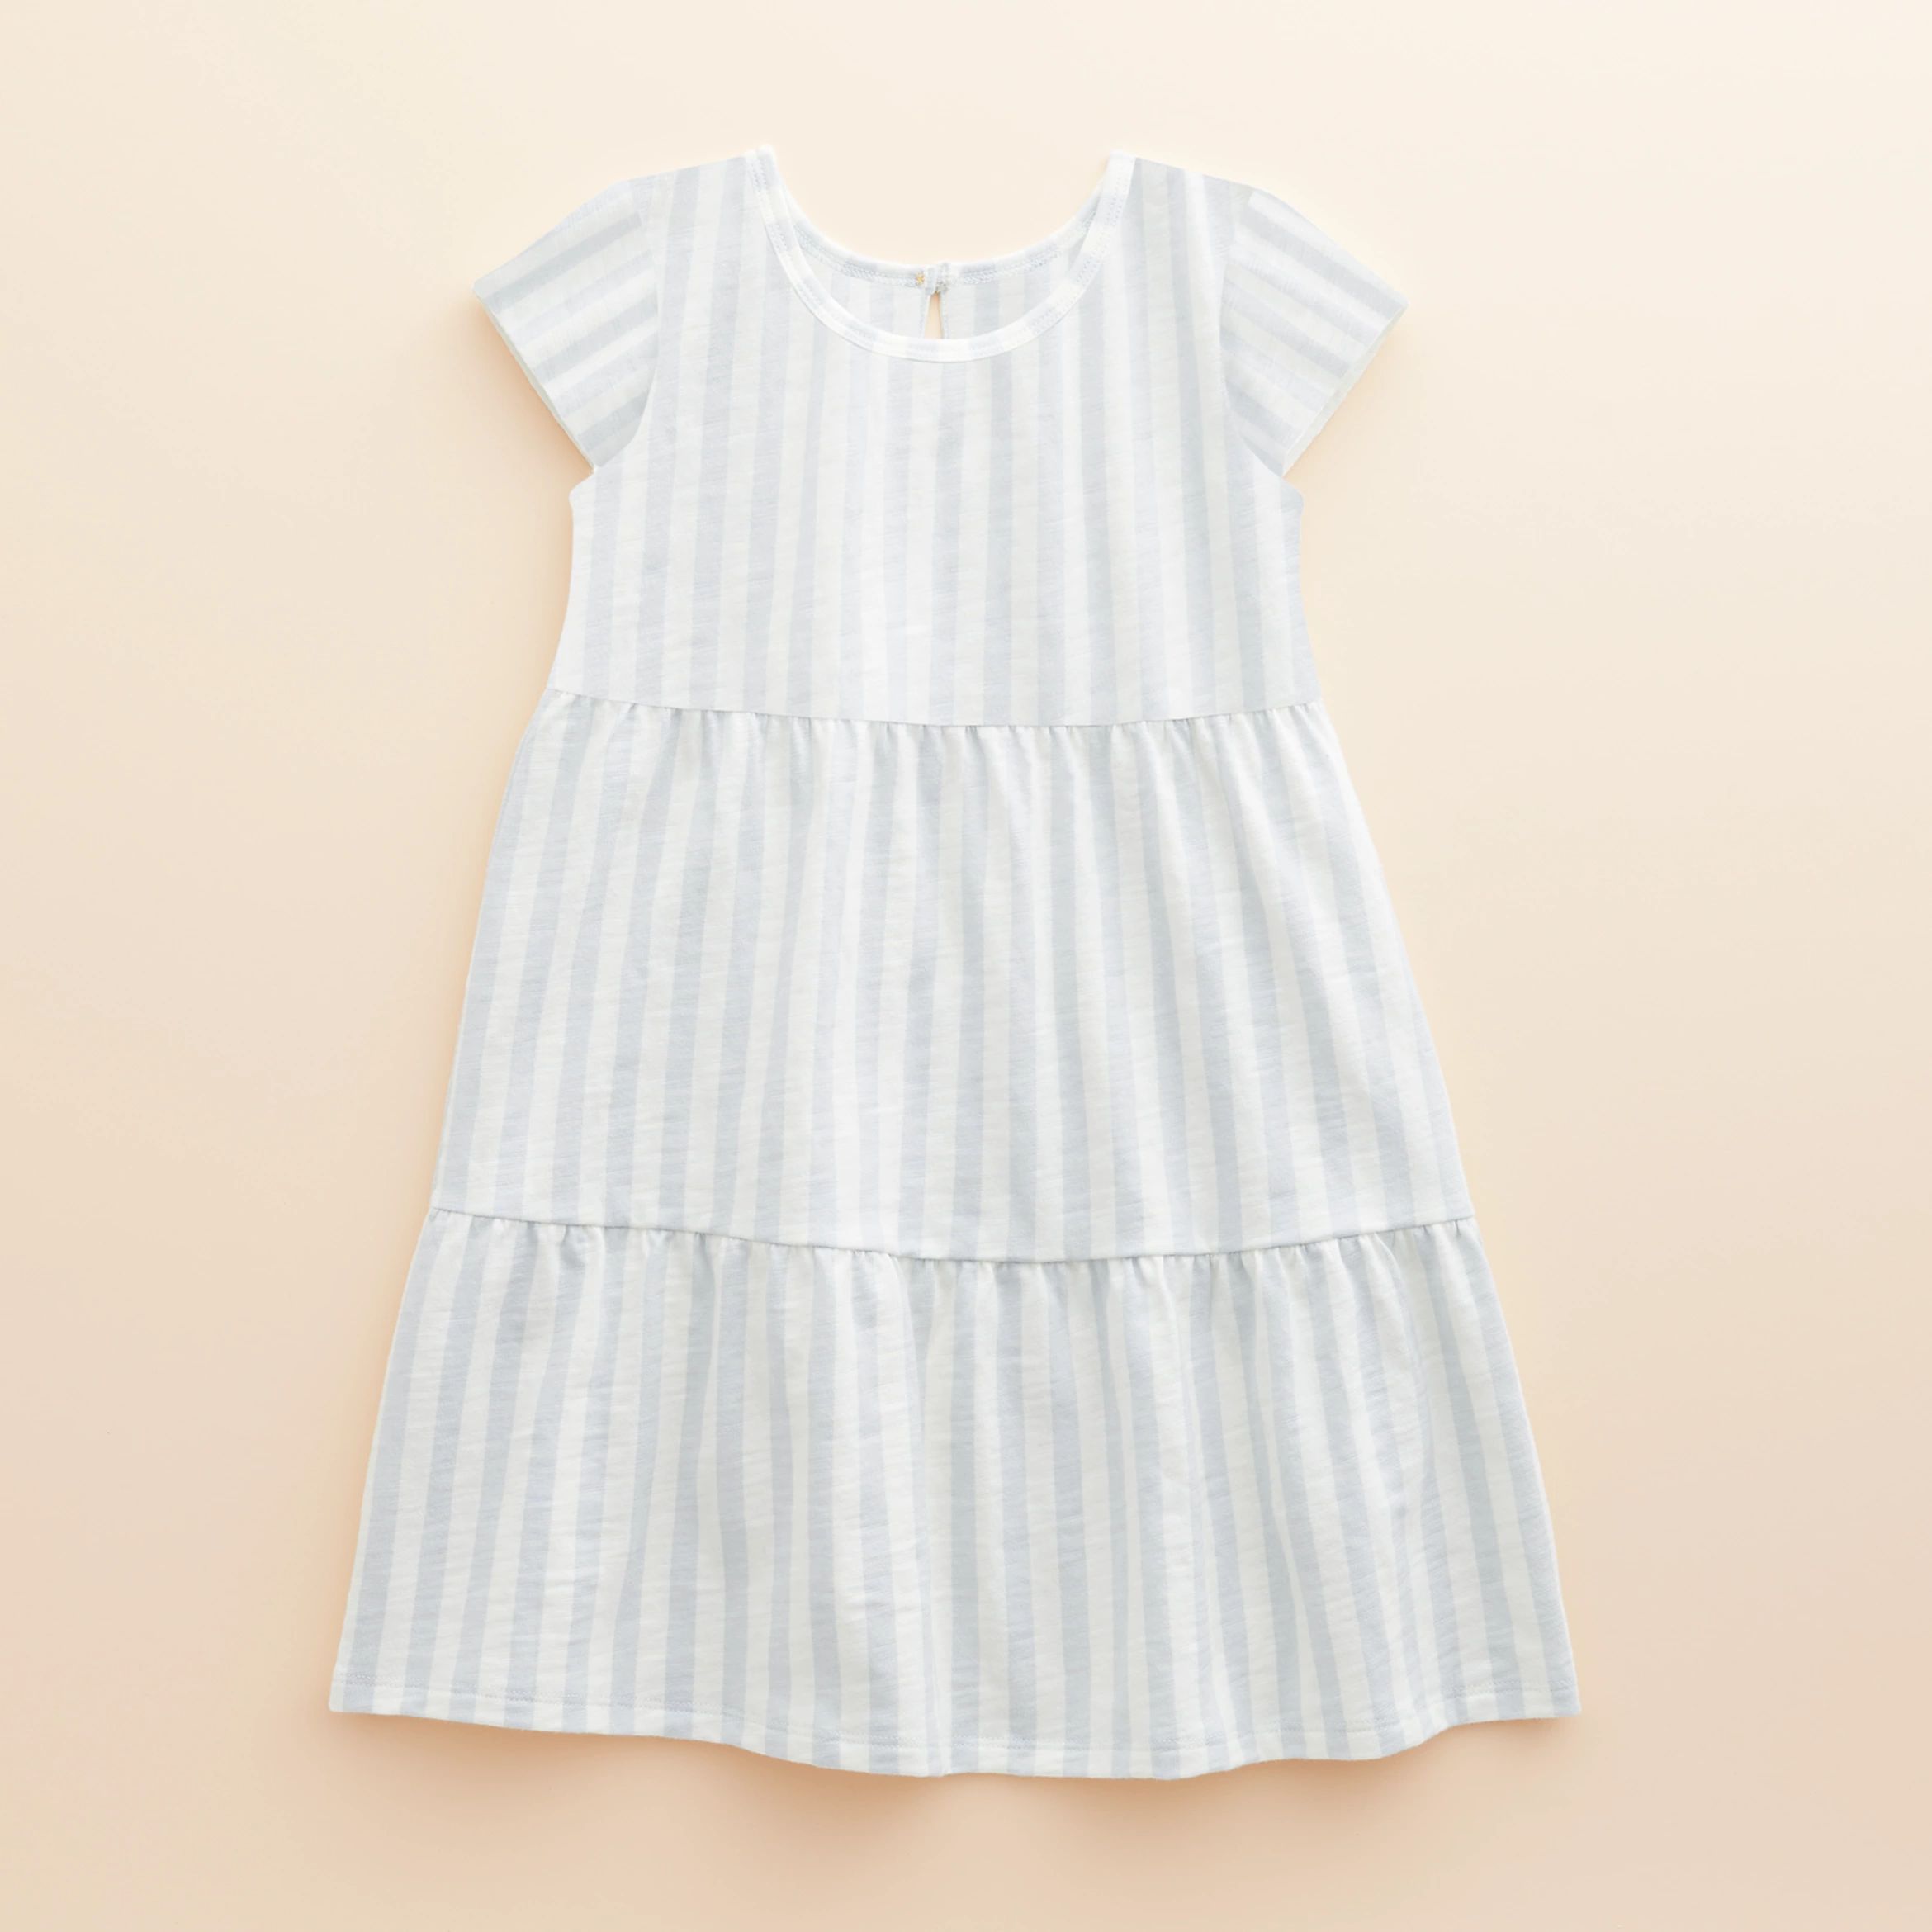 Toddler Girl Little Co. by Lauren Conrad Organic Tiered Dress | Kohl's